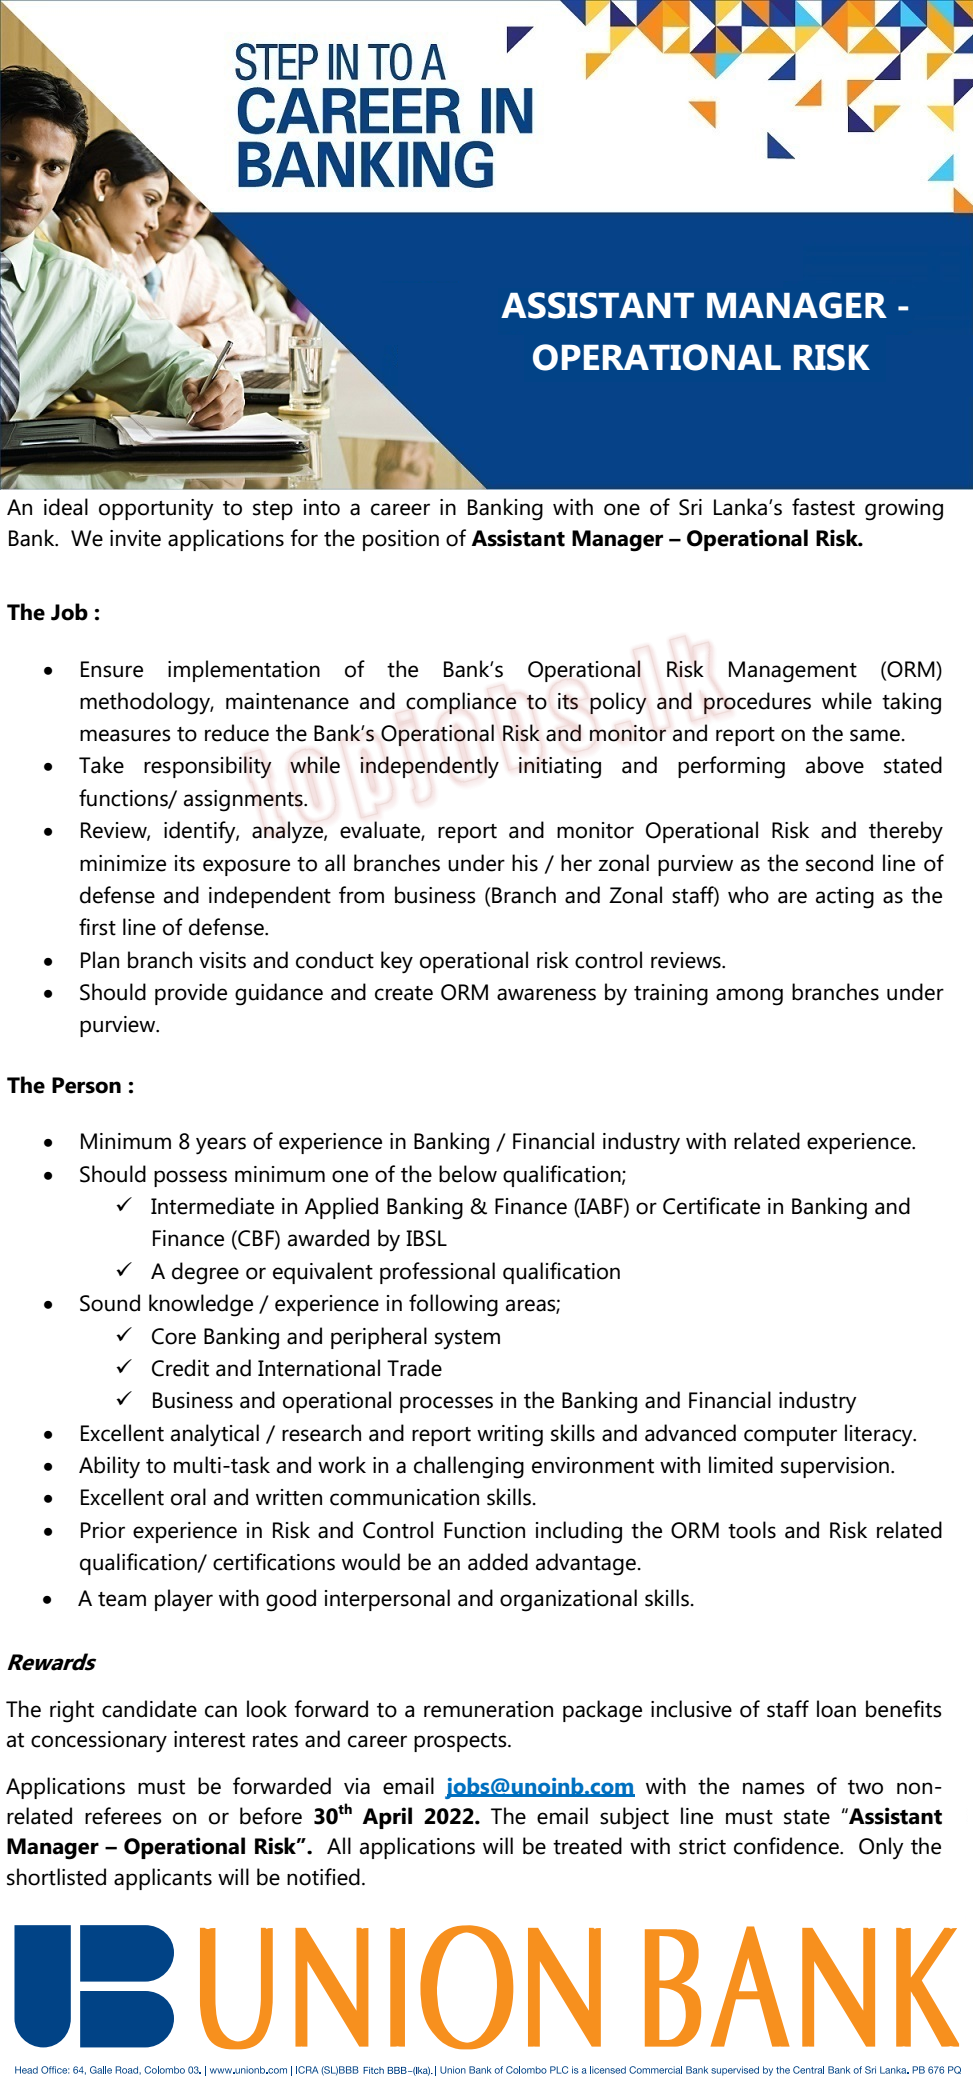 Union Bank Vacancy for Assistant Manager of Operational Risk